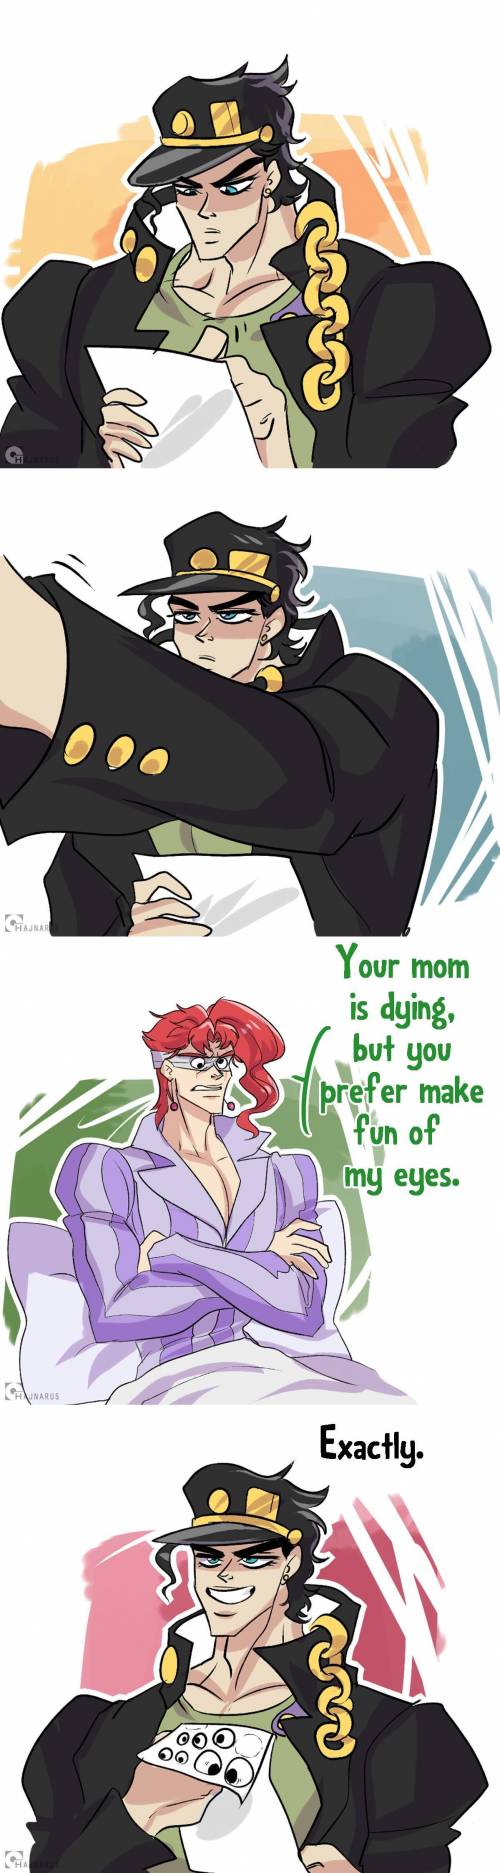 JJBA FANS!!! HERE'S YOUR DAILY DOSE OF MEMES!..and other stuff... (✿◡‿◡) (note: I clearly didn't ma